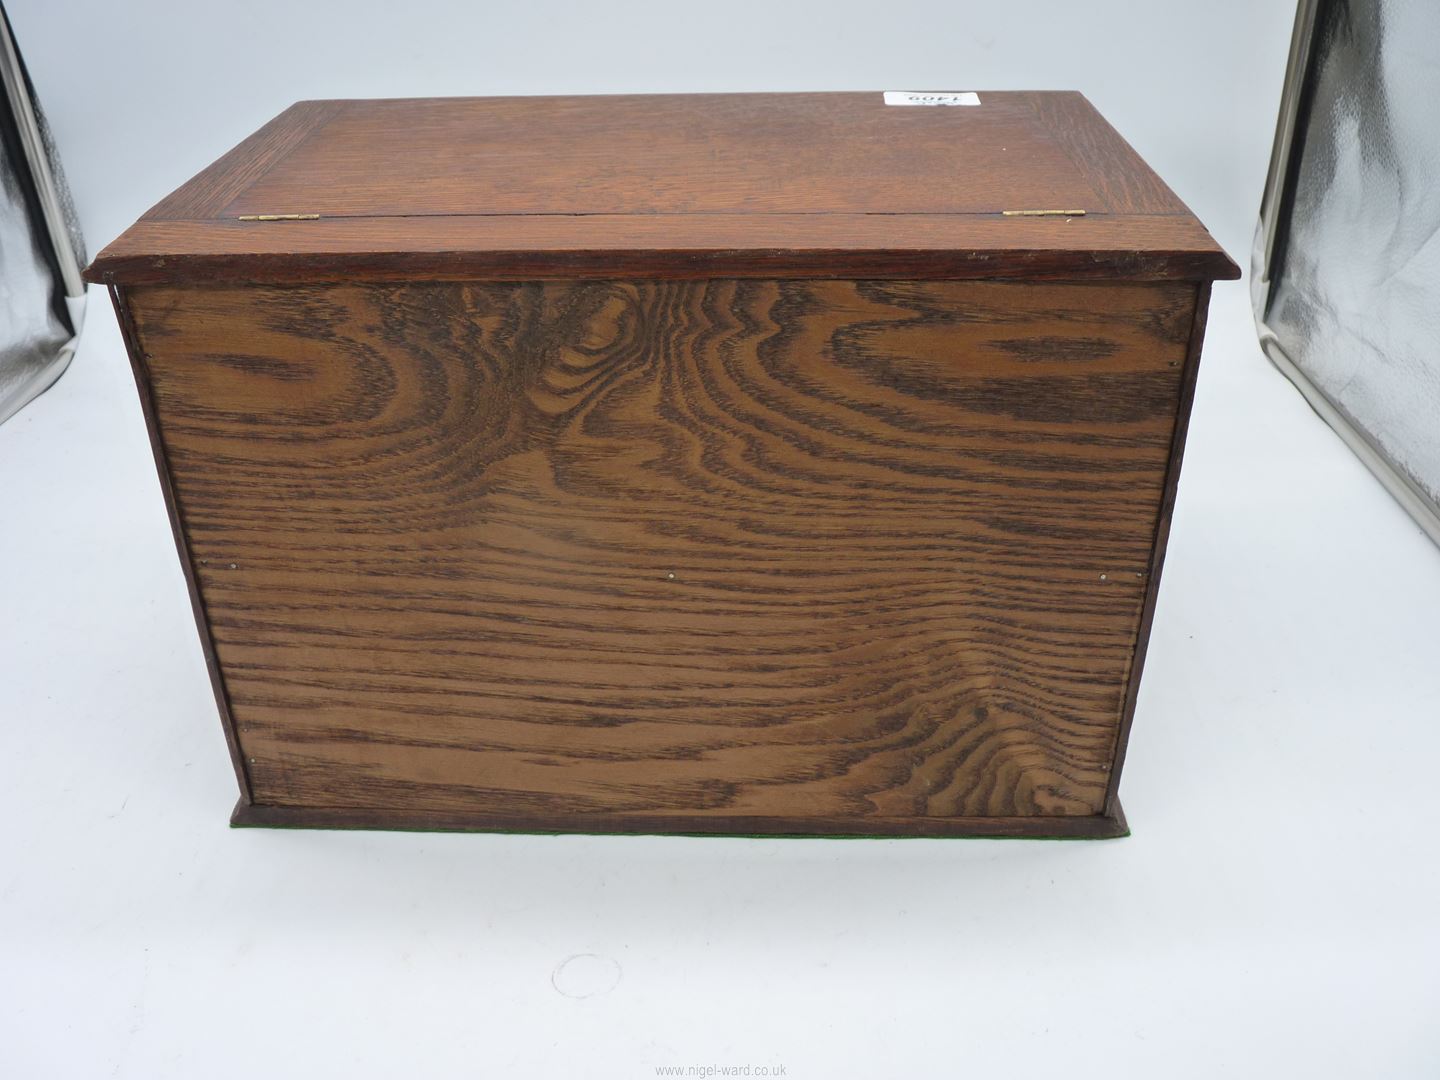 An Oak Box with lift-up lid and lower drawer, 13 1/2'' x 8 1/4'' x 9'' high. - Image 3 of 3